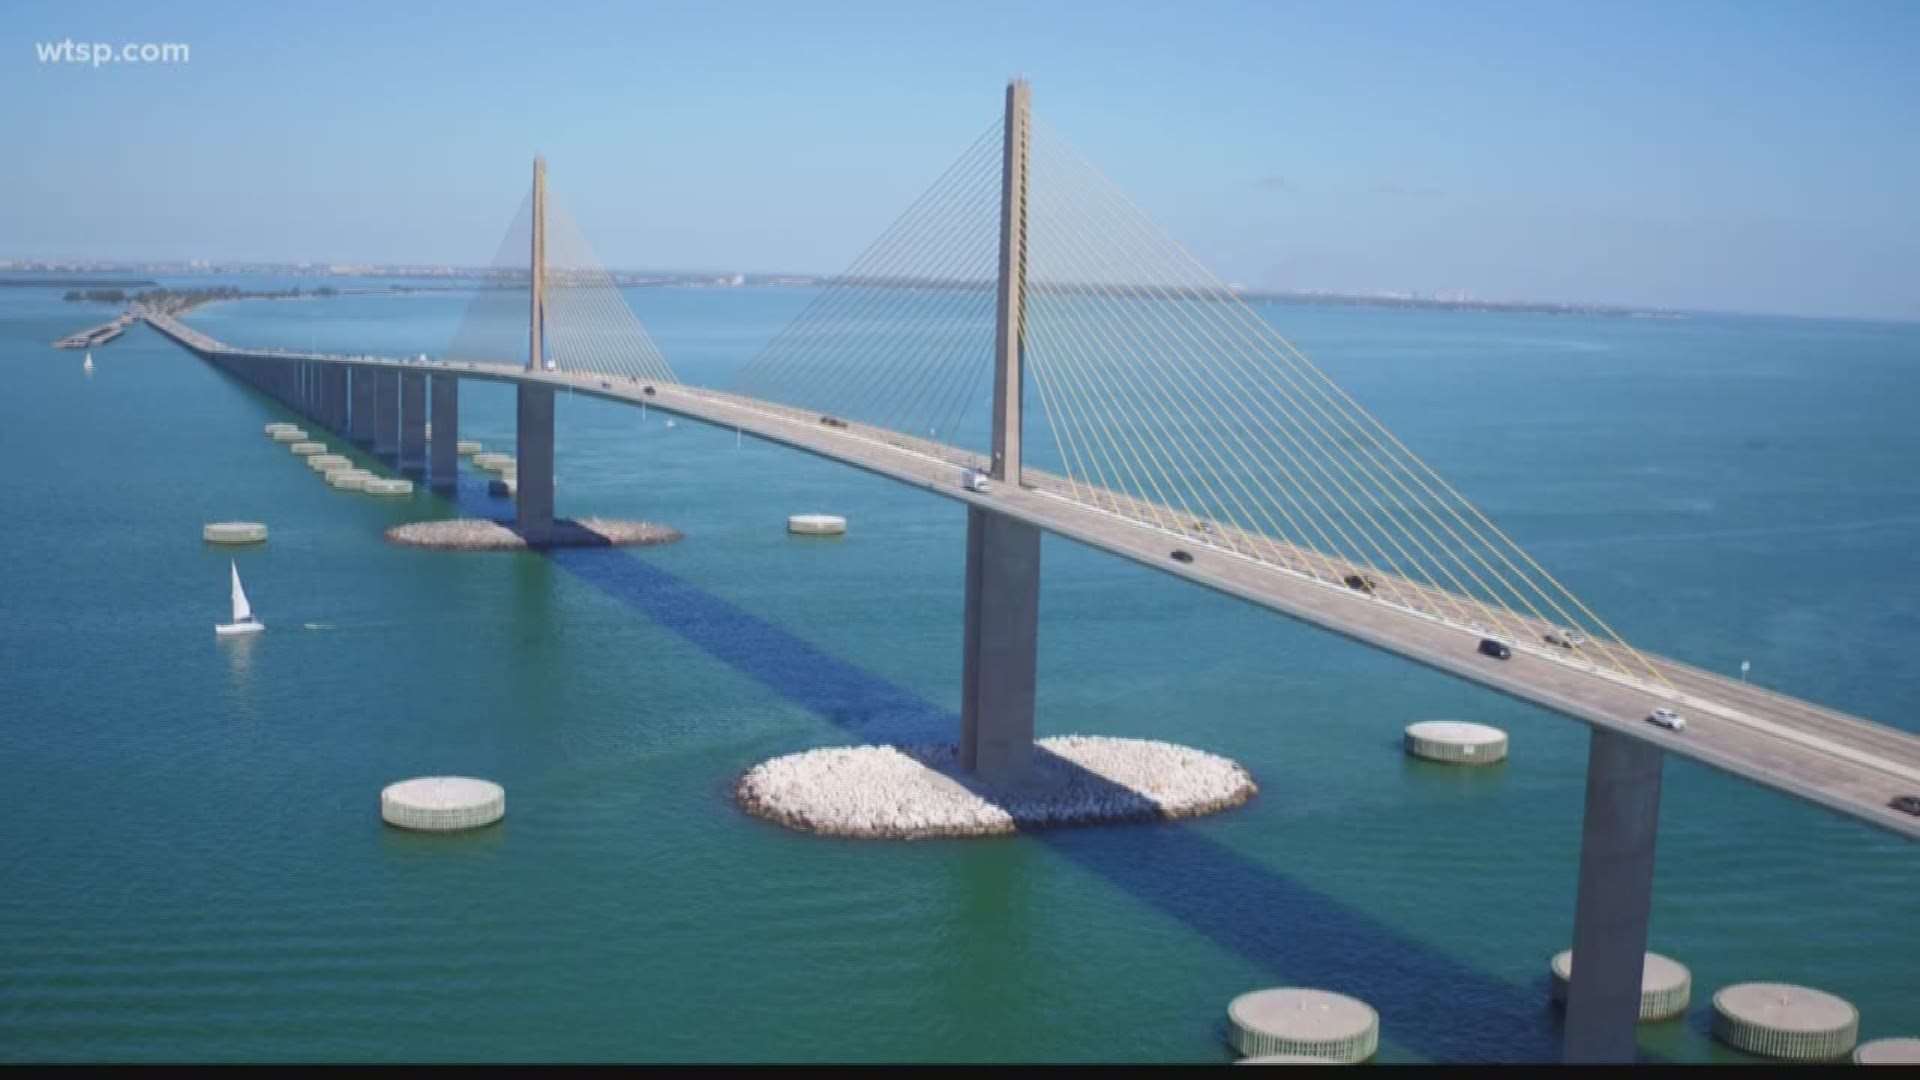 The Skyway Vertical Net project will begin construction over the summer.